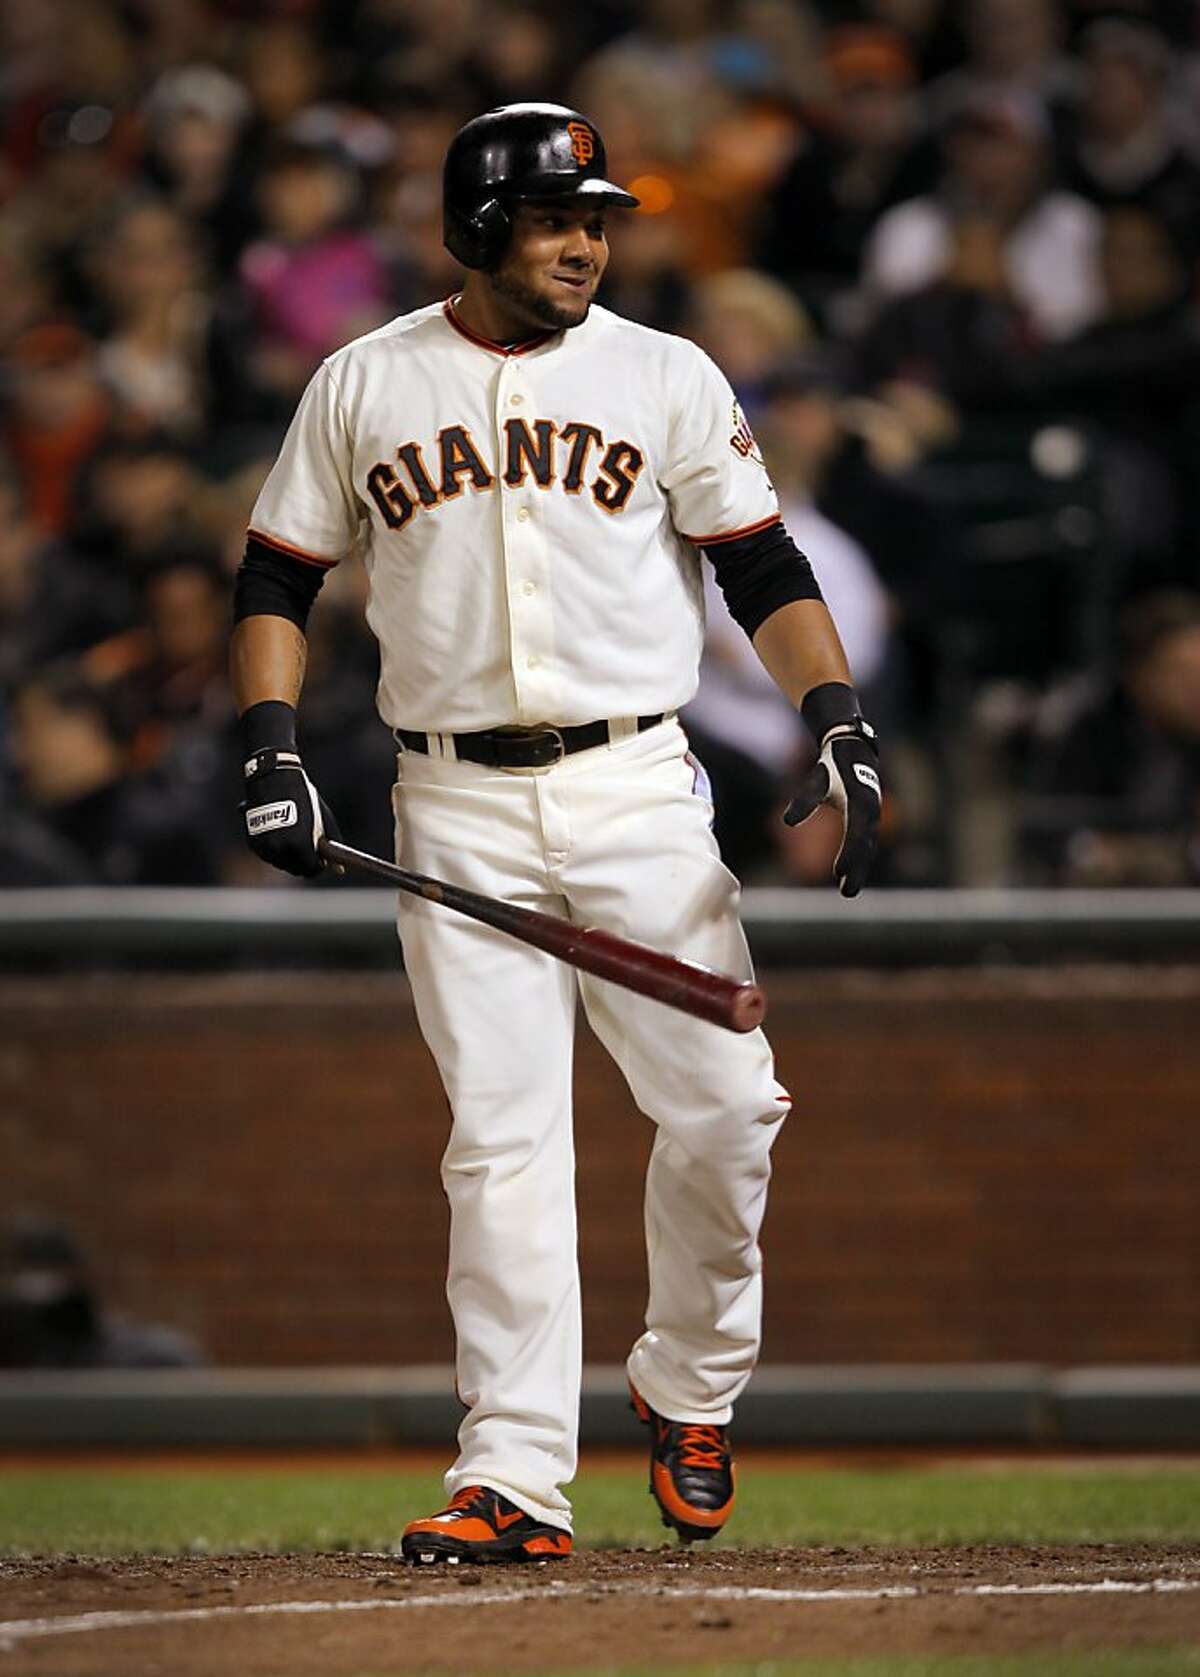 San Francisco Giants left fielder Melky Cabrera smiles while up to bat during their game against the Diamondbacks in San Francisco, Calif. Wednesday, May 30, 2012. Cabrera tied a Giants record for most hits in a month with 51.